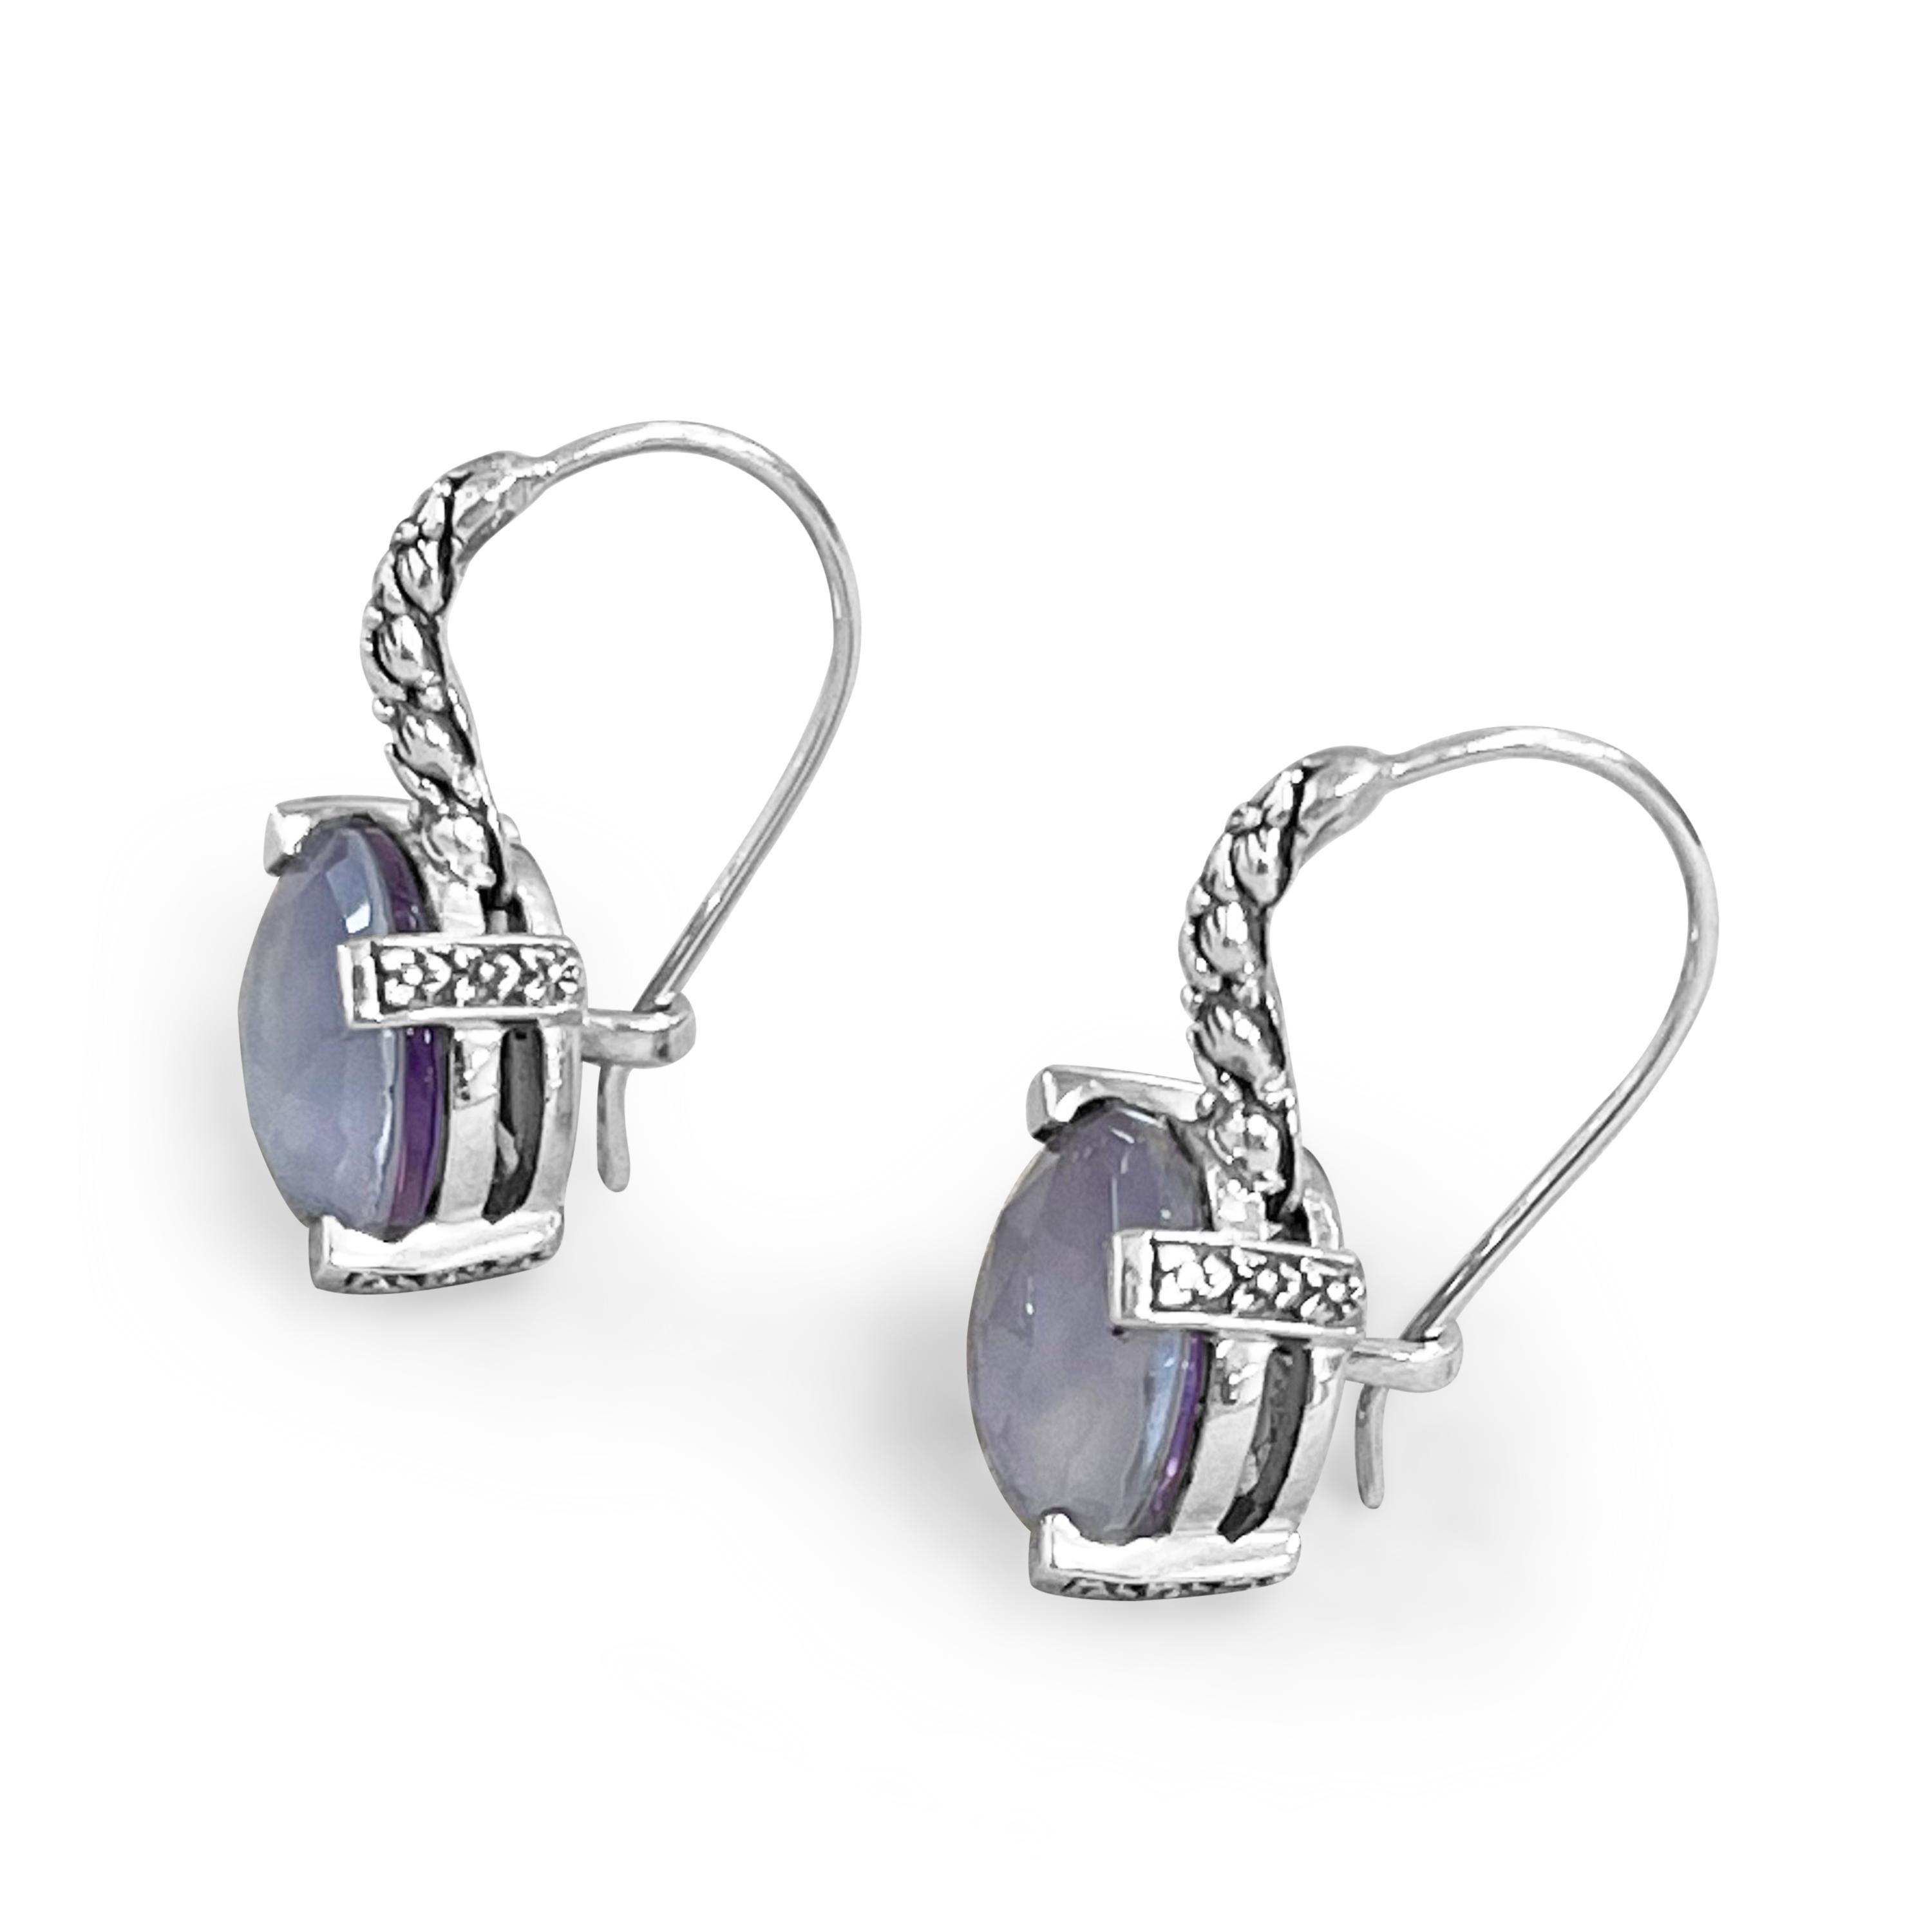 This gorgeous pair of Pink Amethyst with Flower Engraving Sterling Silver Drop Earrings is truly alluring in nature. The beautiful combination of pink amethyst and flower engravings draws the eyes in and keeps them there. From every angle, the